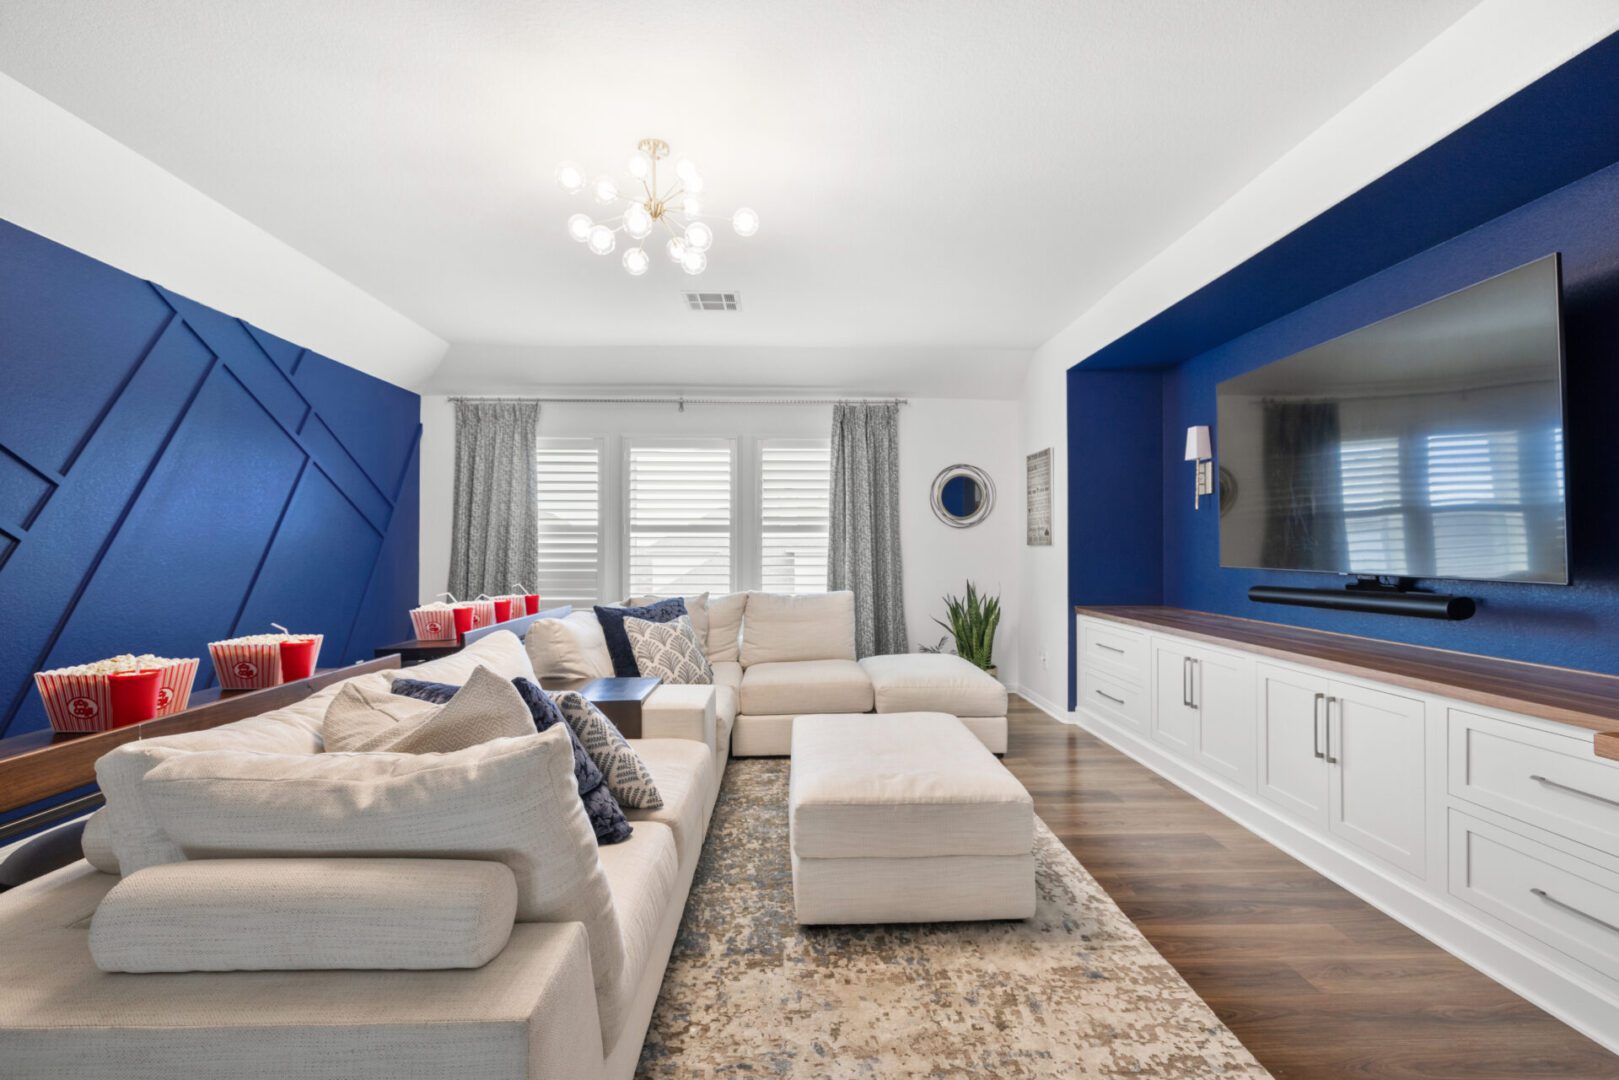 a living room with blue and white theme